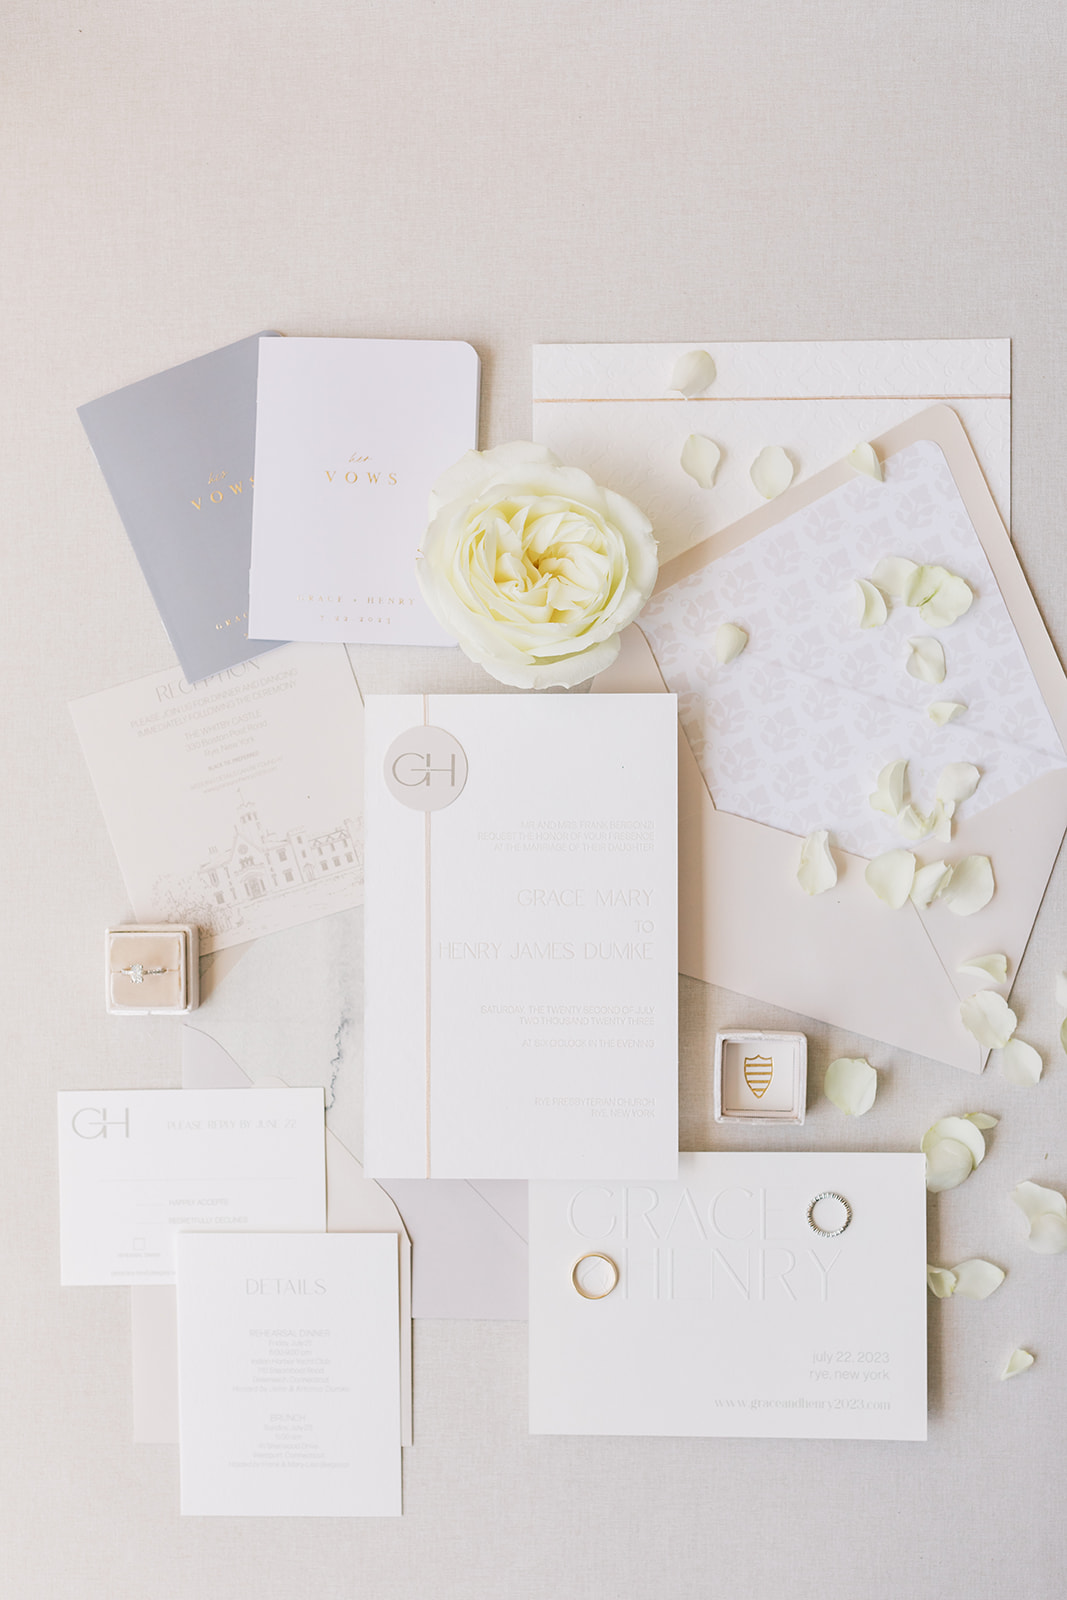 Wedding details with invitation suite with neutrals, champagne, and taupe tones